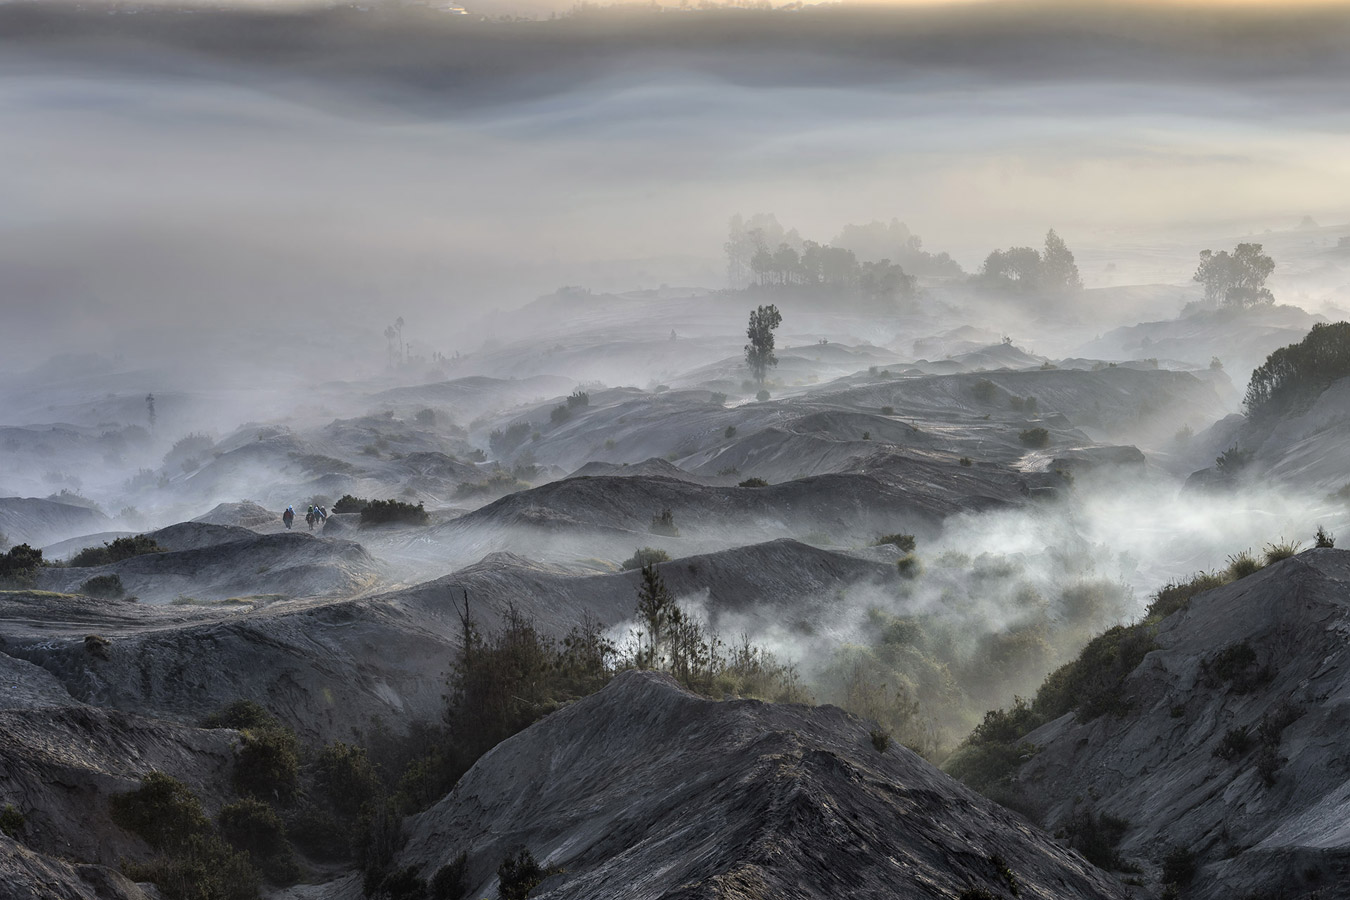 Mystery land, © Min Tan, Sarawak, Malaysia, Highly Honored Landscape, Nature's Best Photography Asia